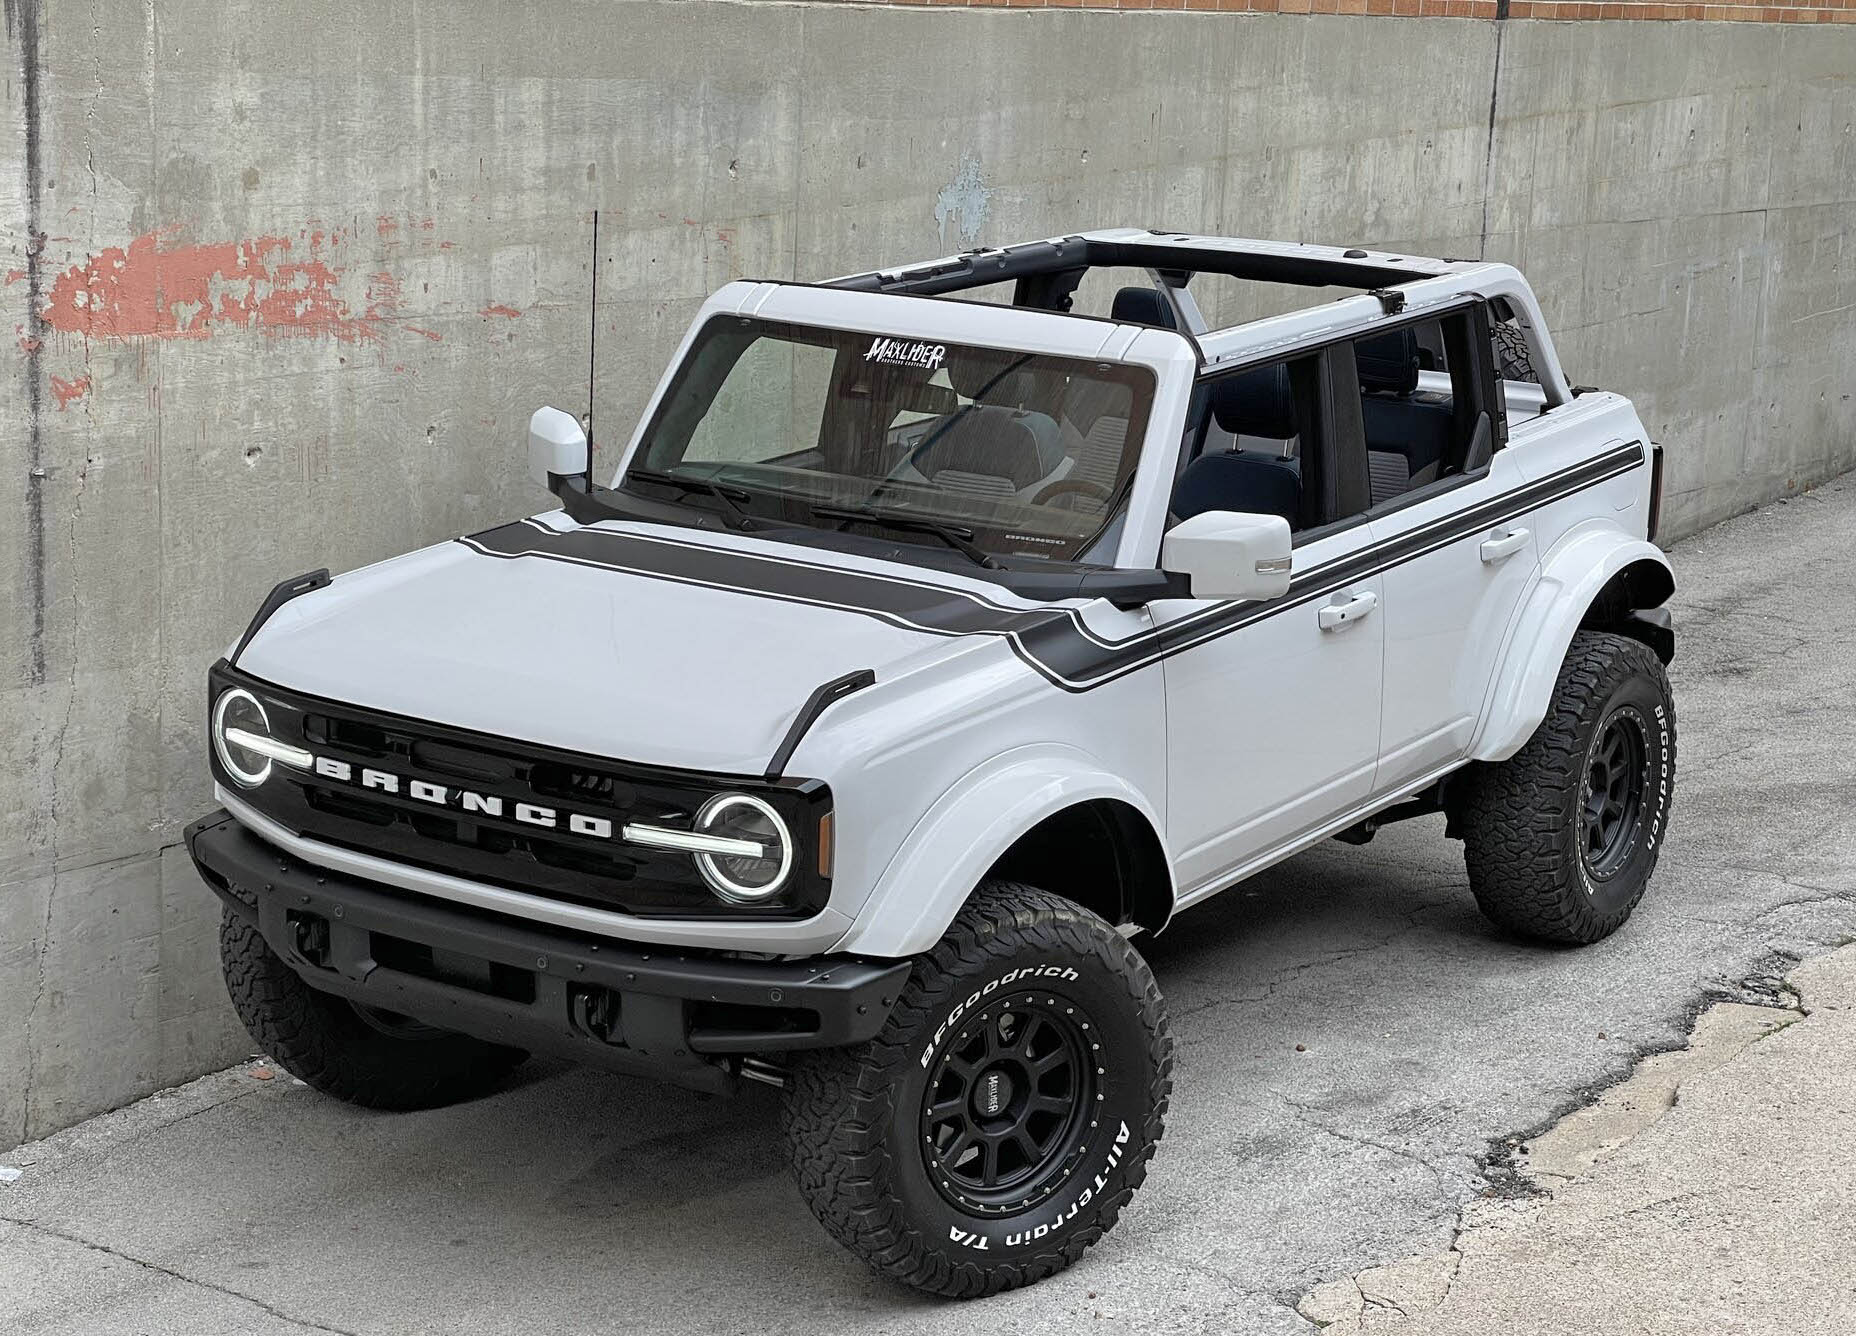 Maxlider Bros Clydesdale Ii 2021 Bronco Build Progress A Tribute To